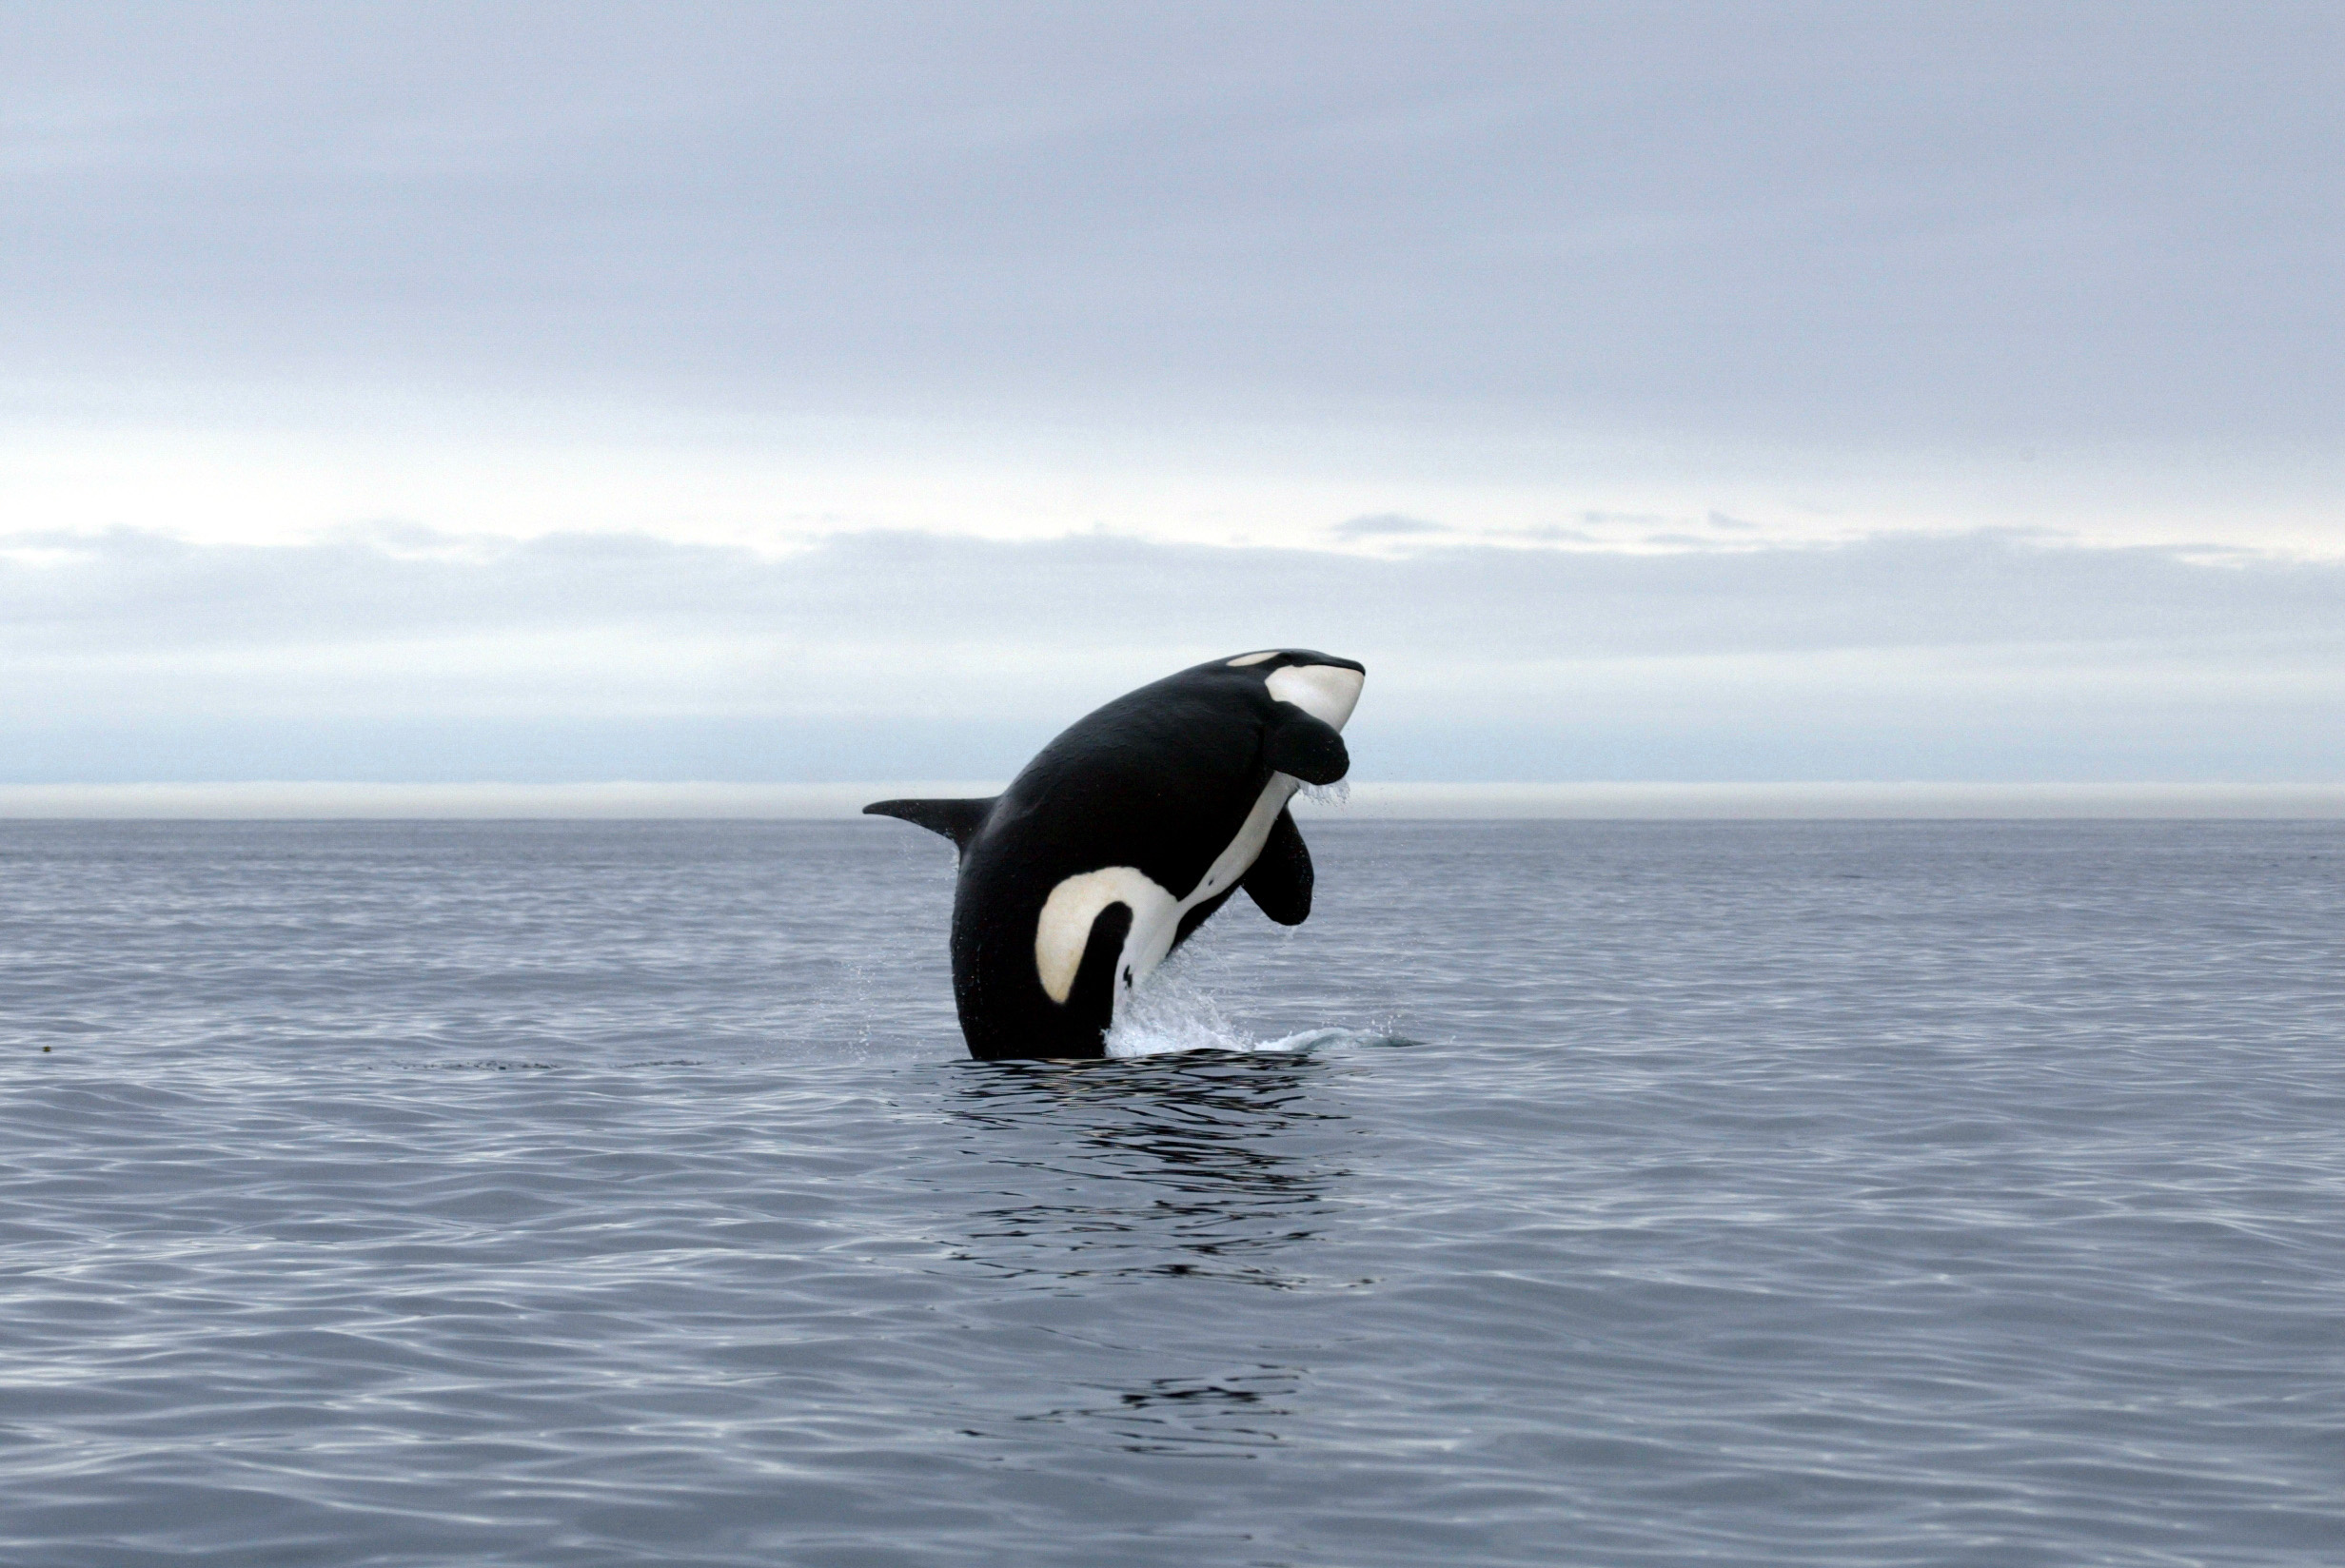 PHOTO: In an undated stock photo, an orca is seen jumping out of the water.